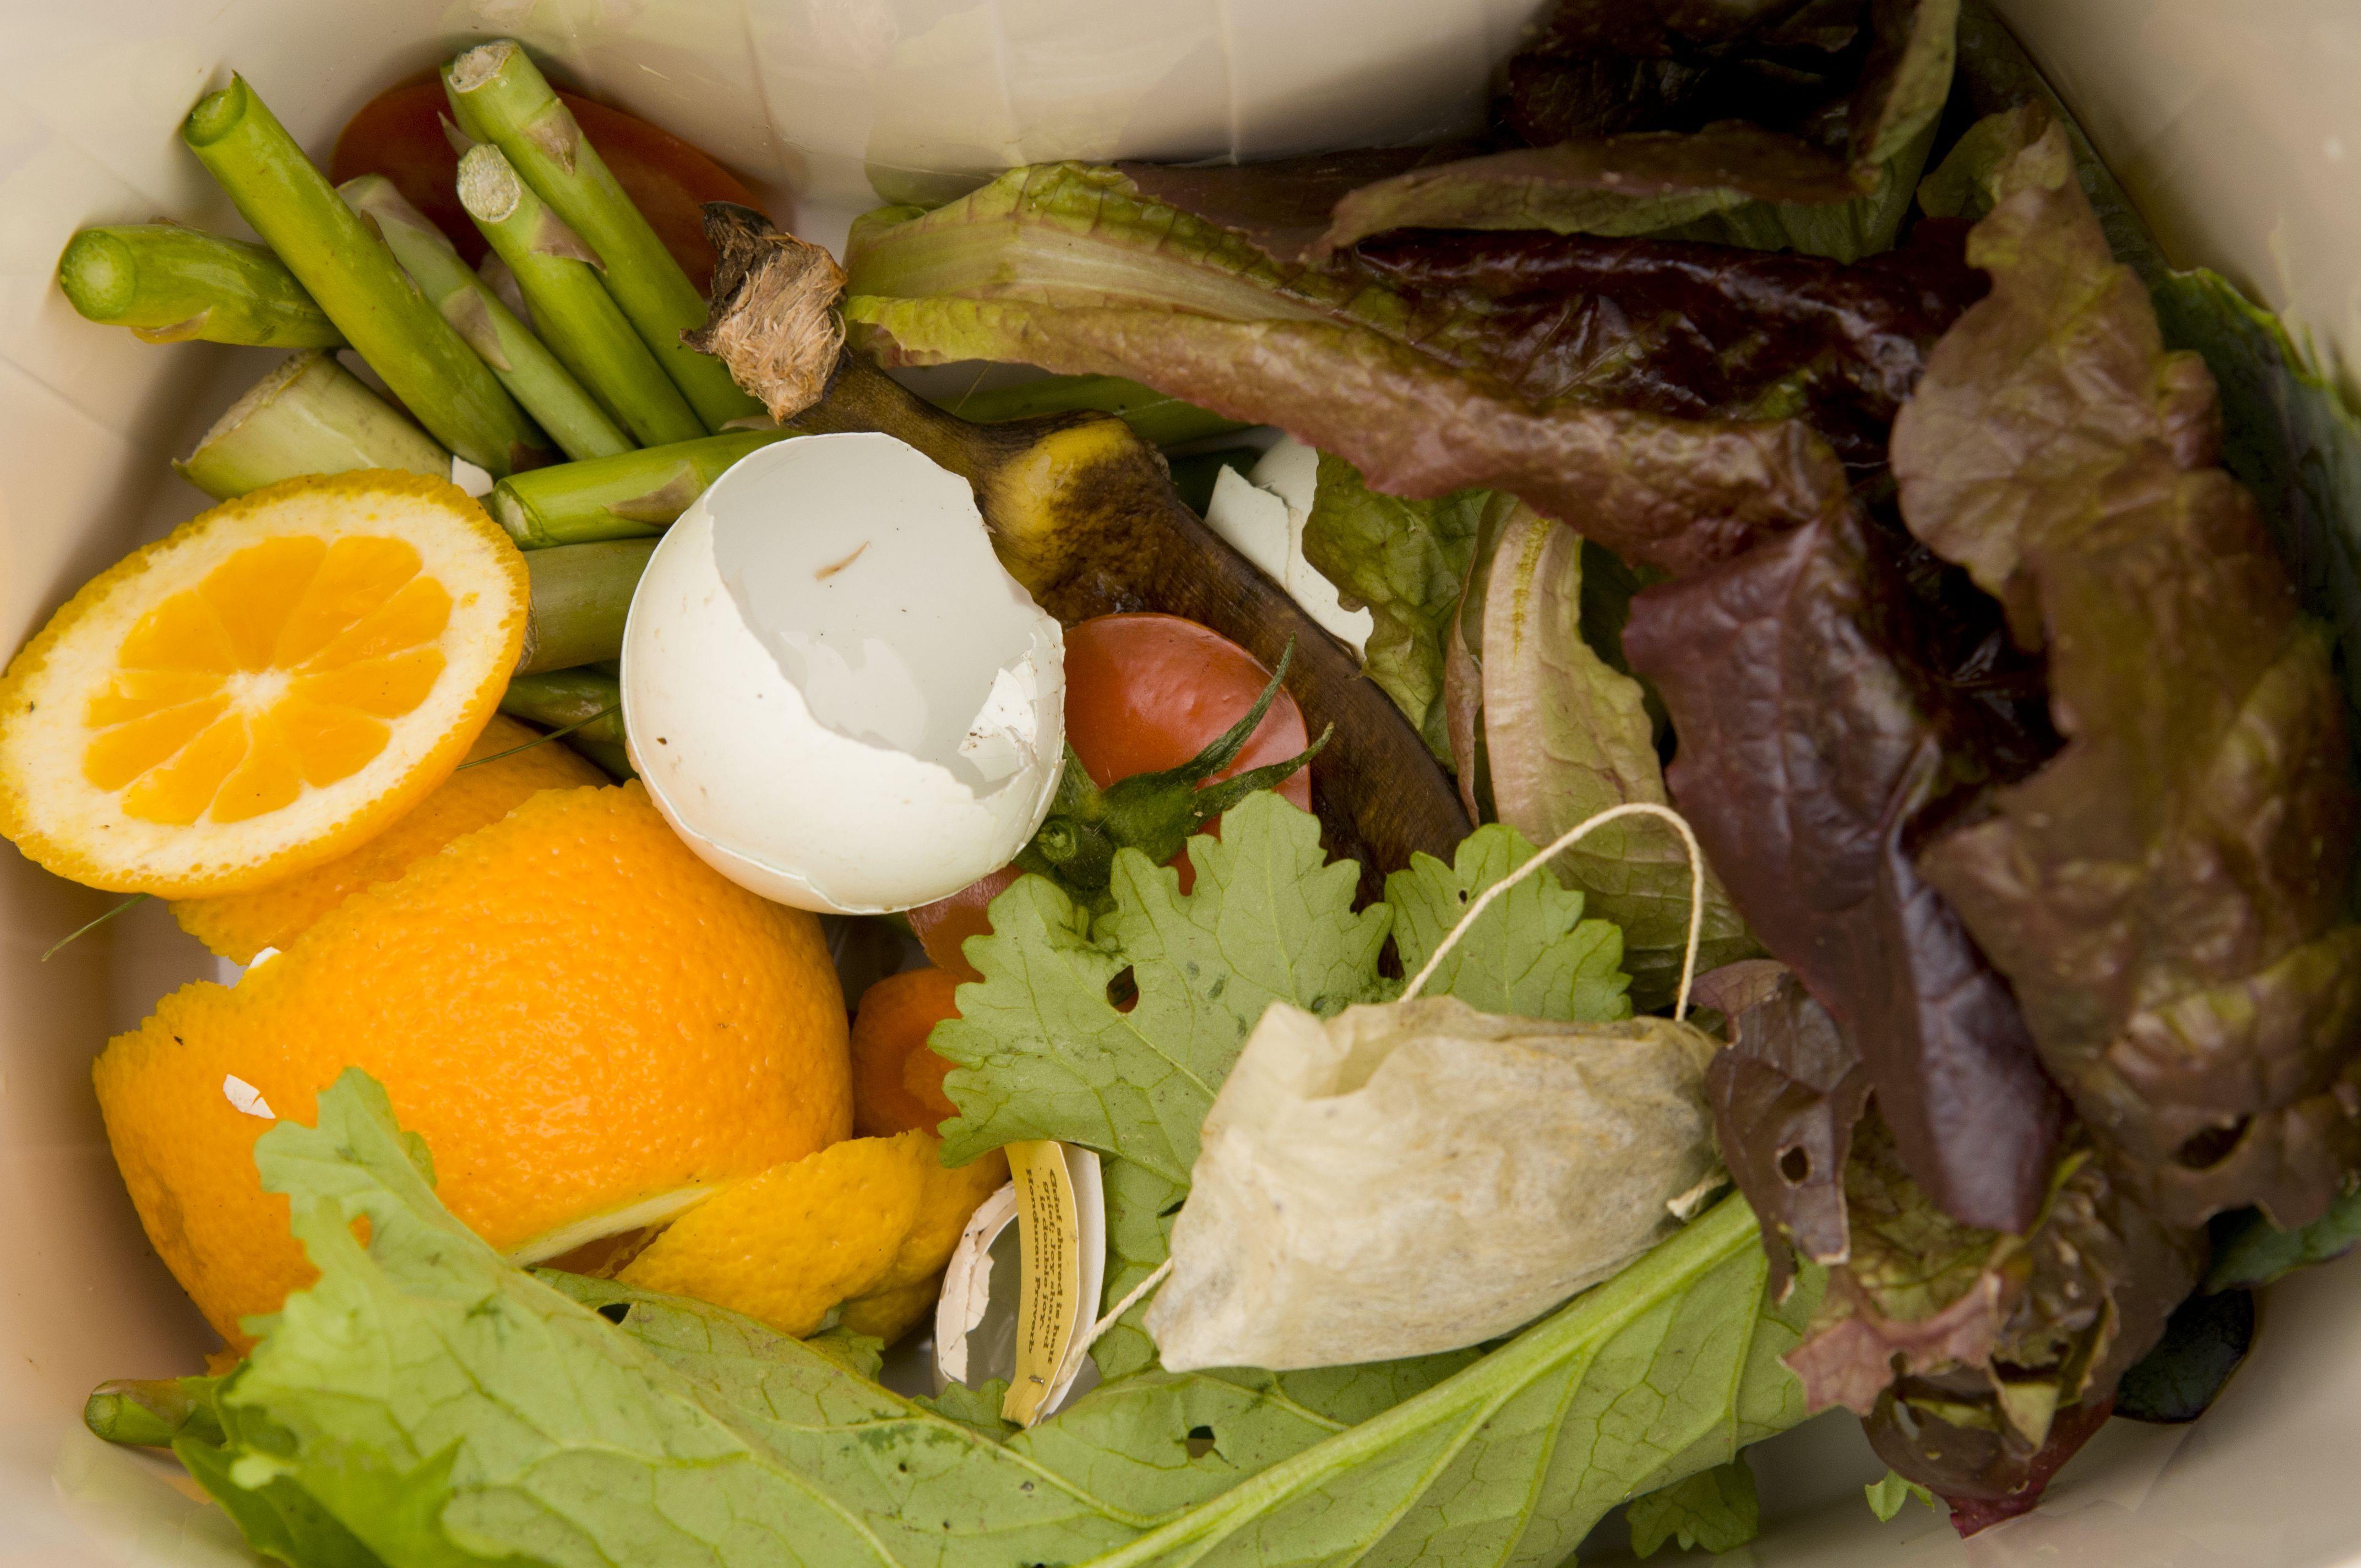 Council to consider proposed food scraps policy Thursday | Metro